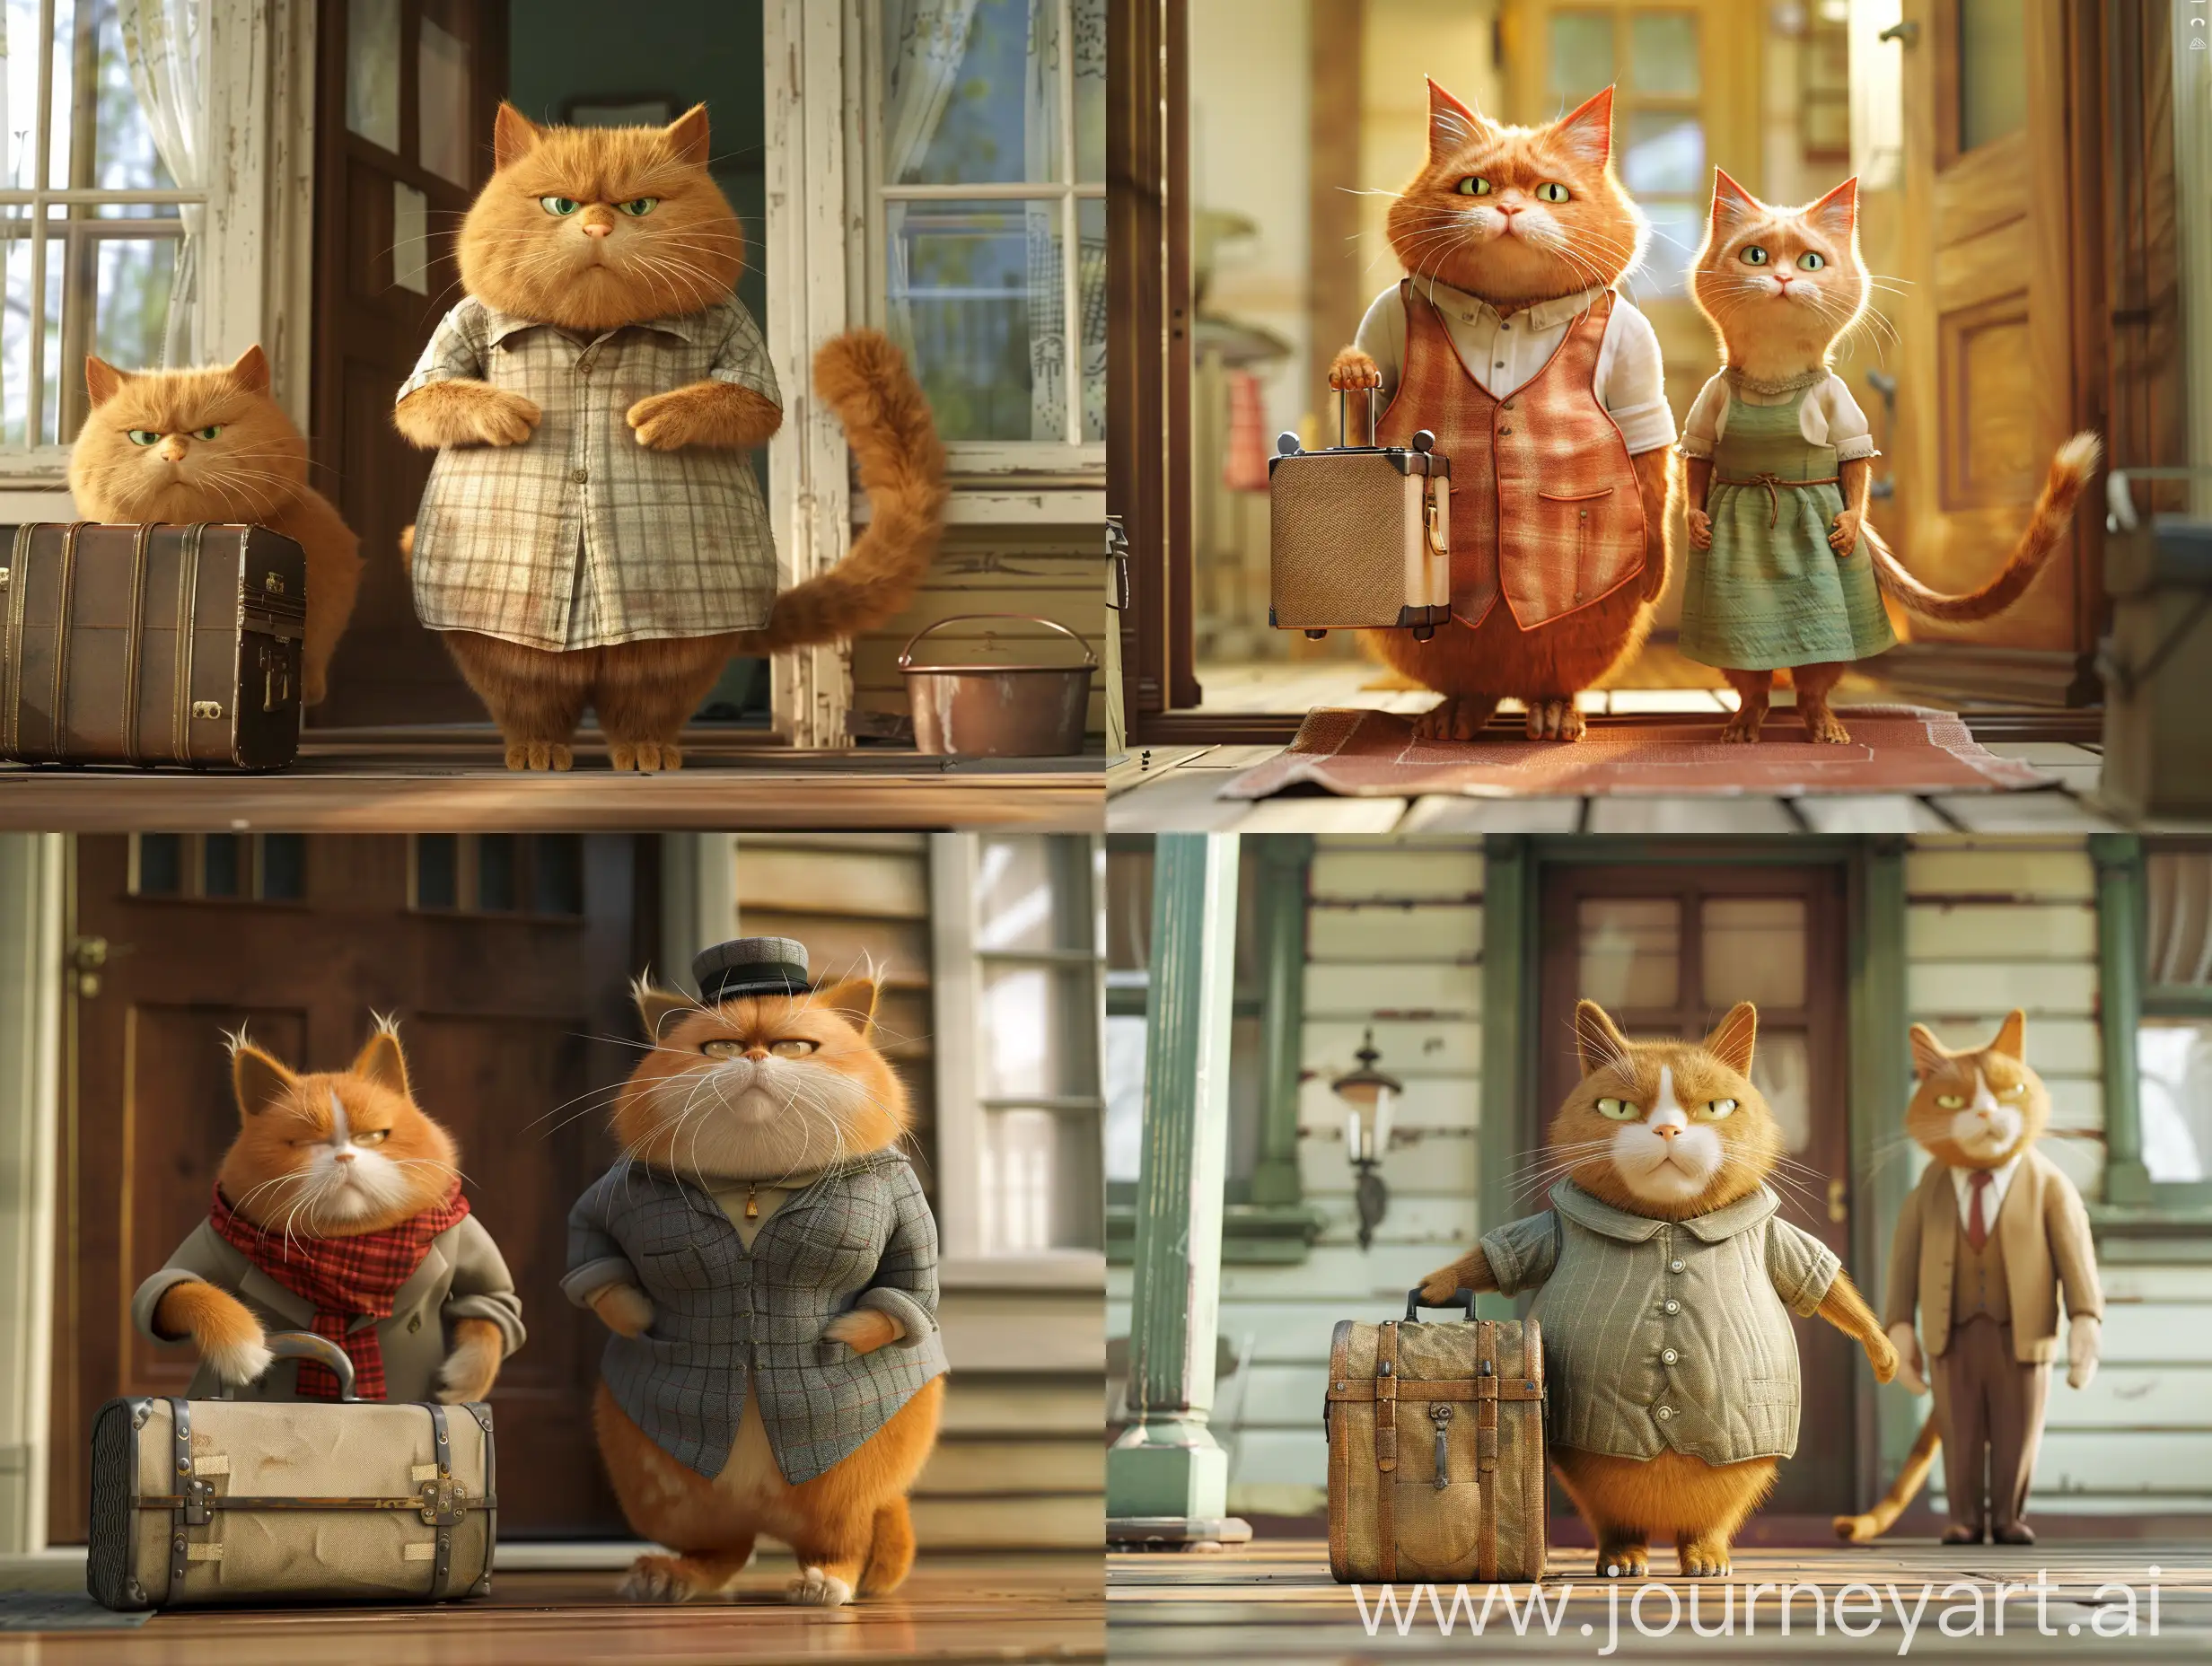 Ginger-Cat-Parents-Farewell-Scene-Emotional-Anthropomorphic-Cat-Couple-Saying-Goodbye-at-Homes-Front-Door-with-Suitcase